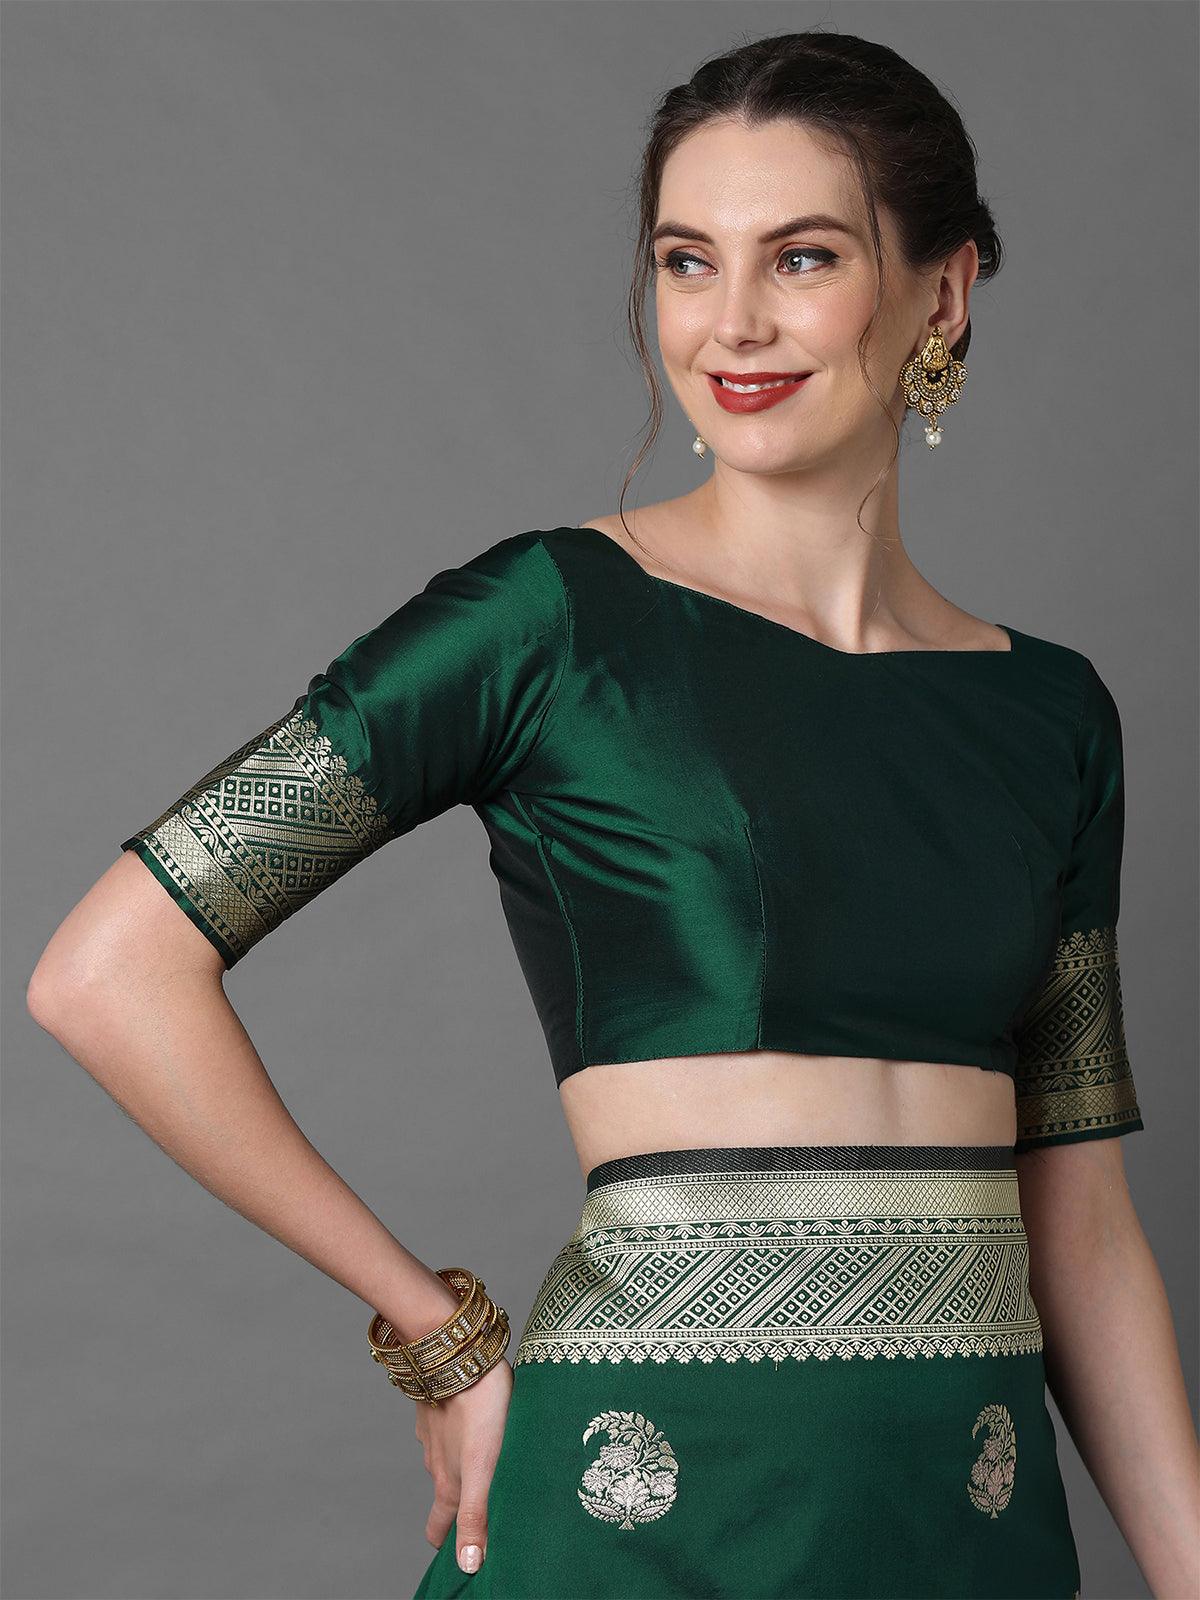 Green Festive Silk Blend Woven Design Saree With Unstitched Blouse - Odette